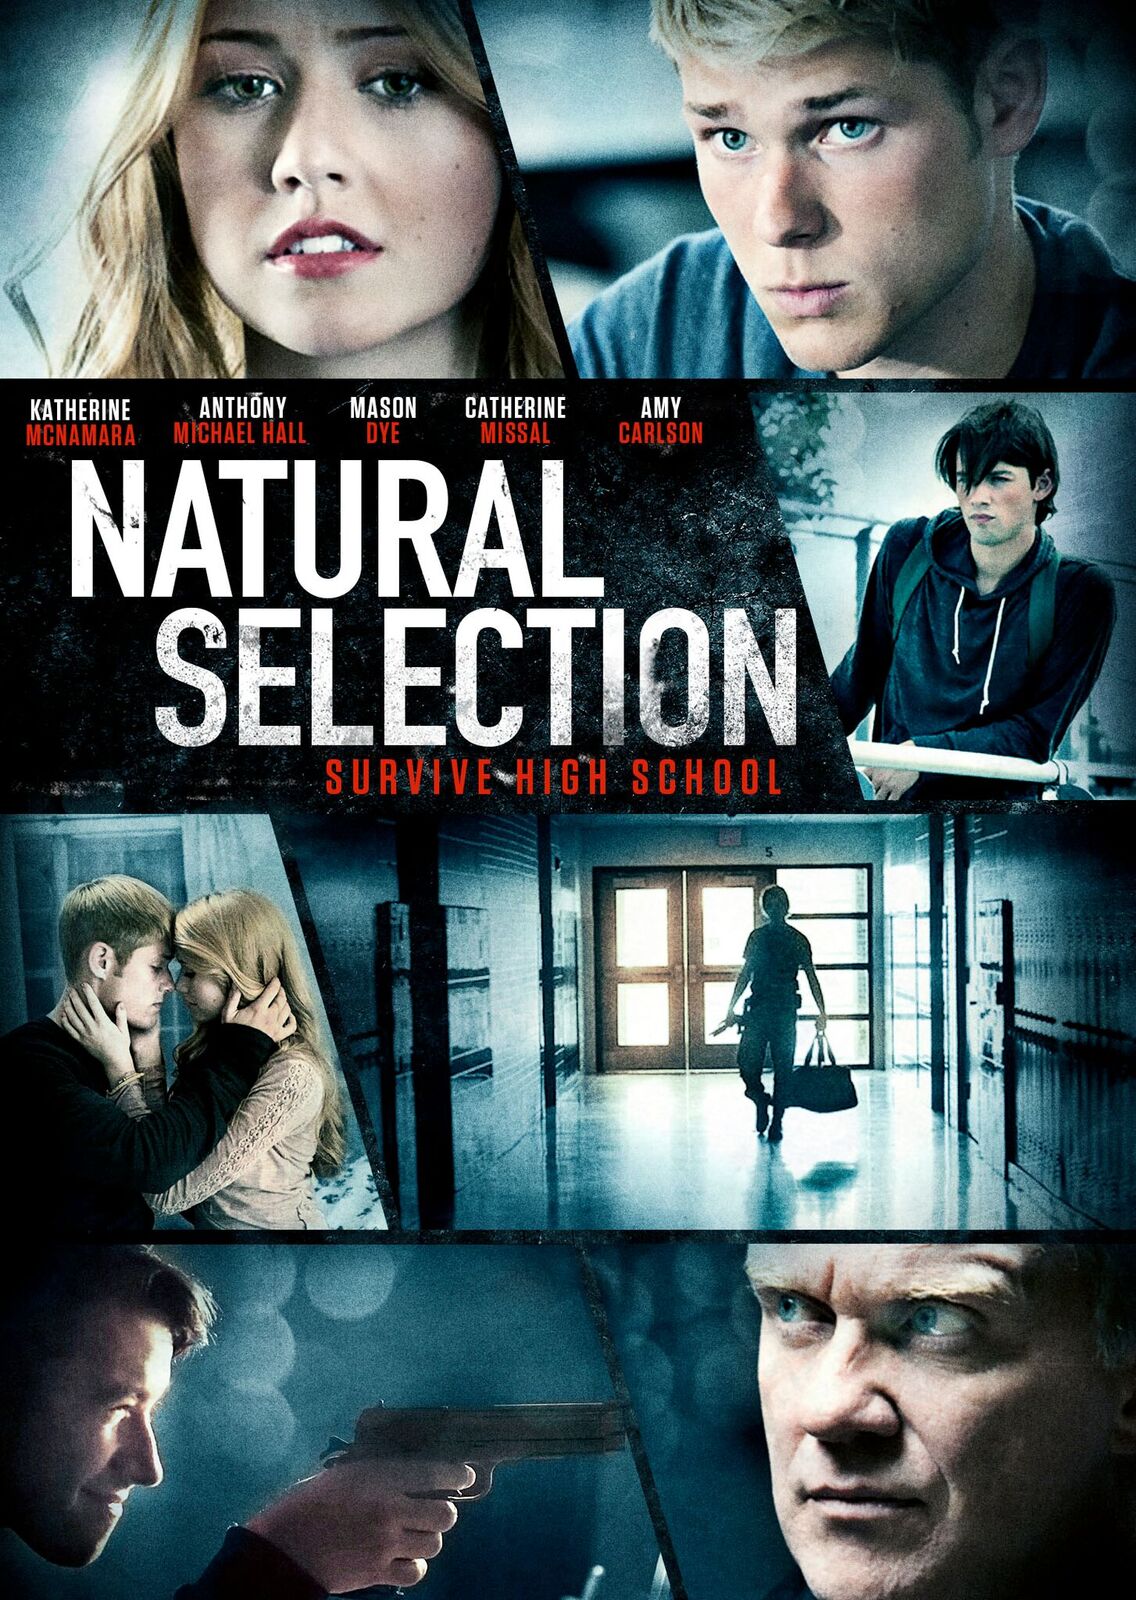 Natural Selection Exclusive Clip Features Anthony Michael Hall Returning to High School as the Authority Figure